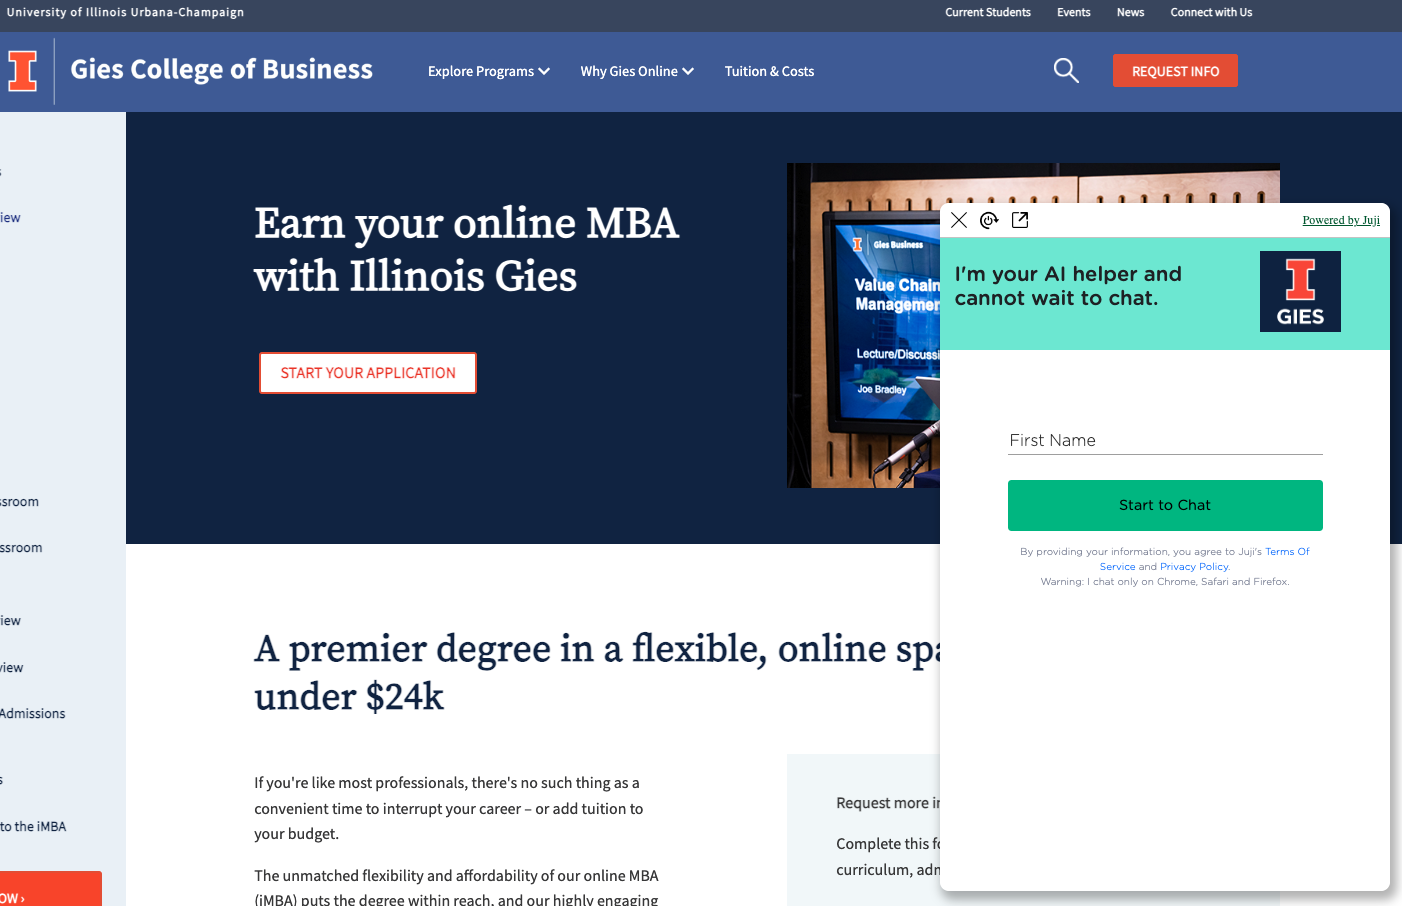 Juji Powers the University of Illinois No-Code AI Chatbot to Help Grow Student Recruitment